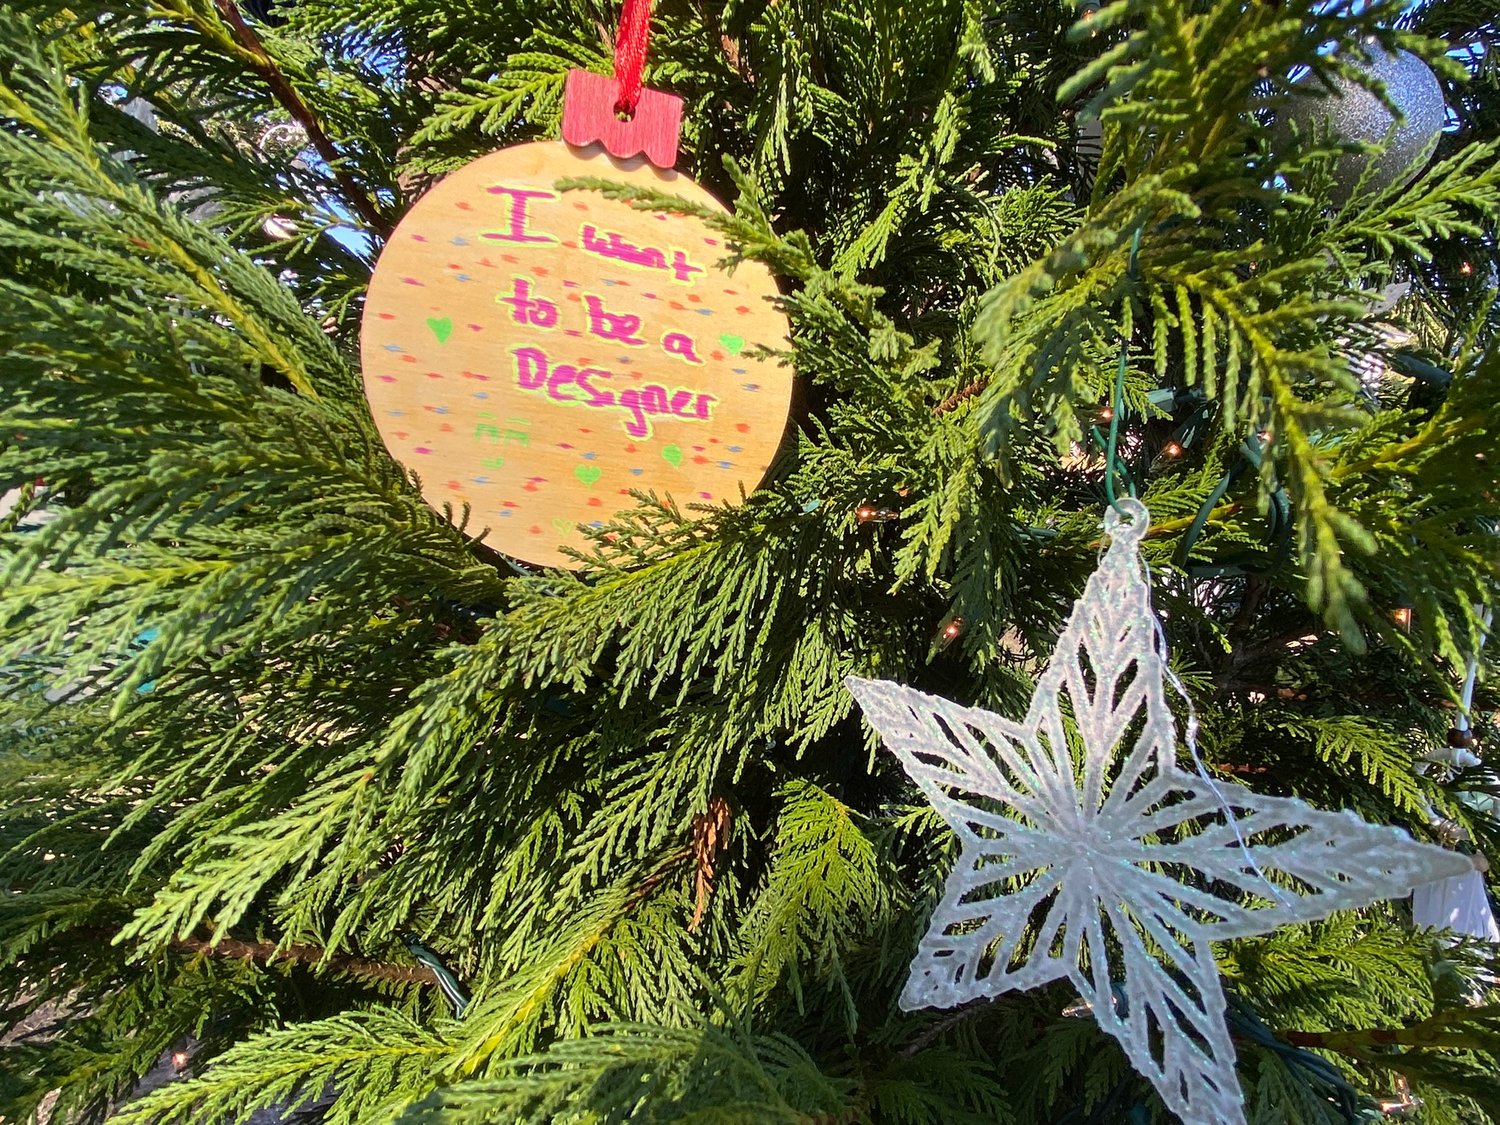 The Dream Center of Baldwin County's tree holds ornaments filled with children's dreams.